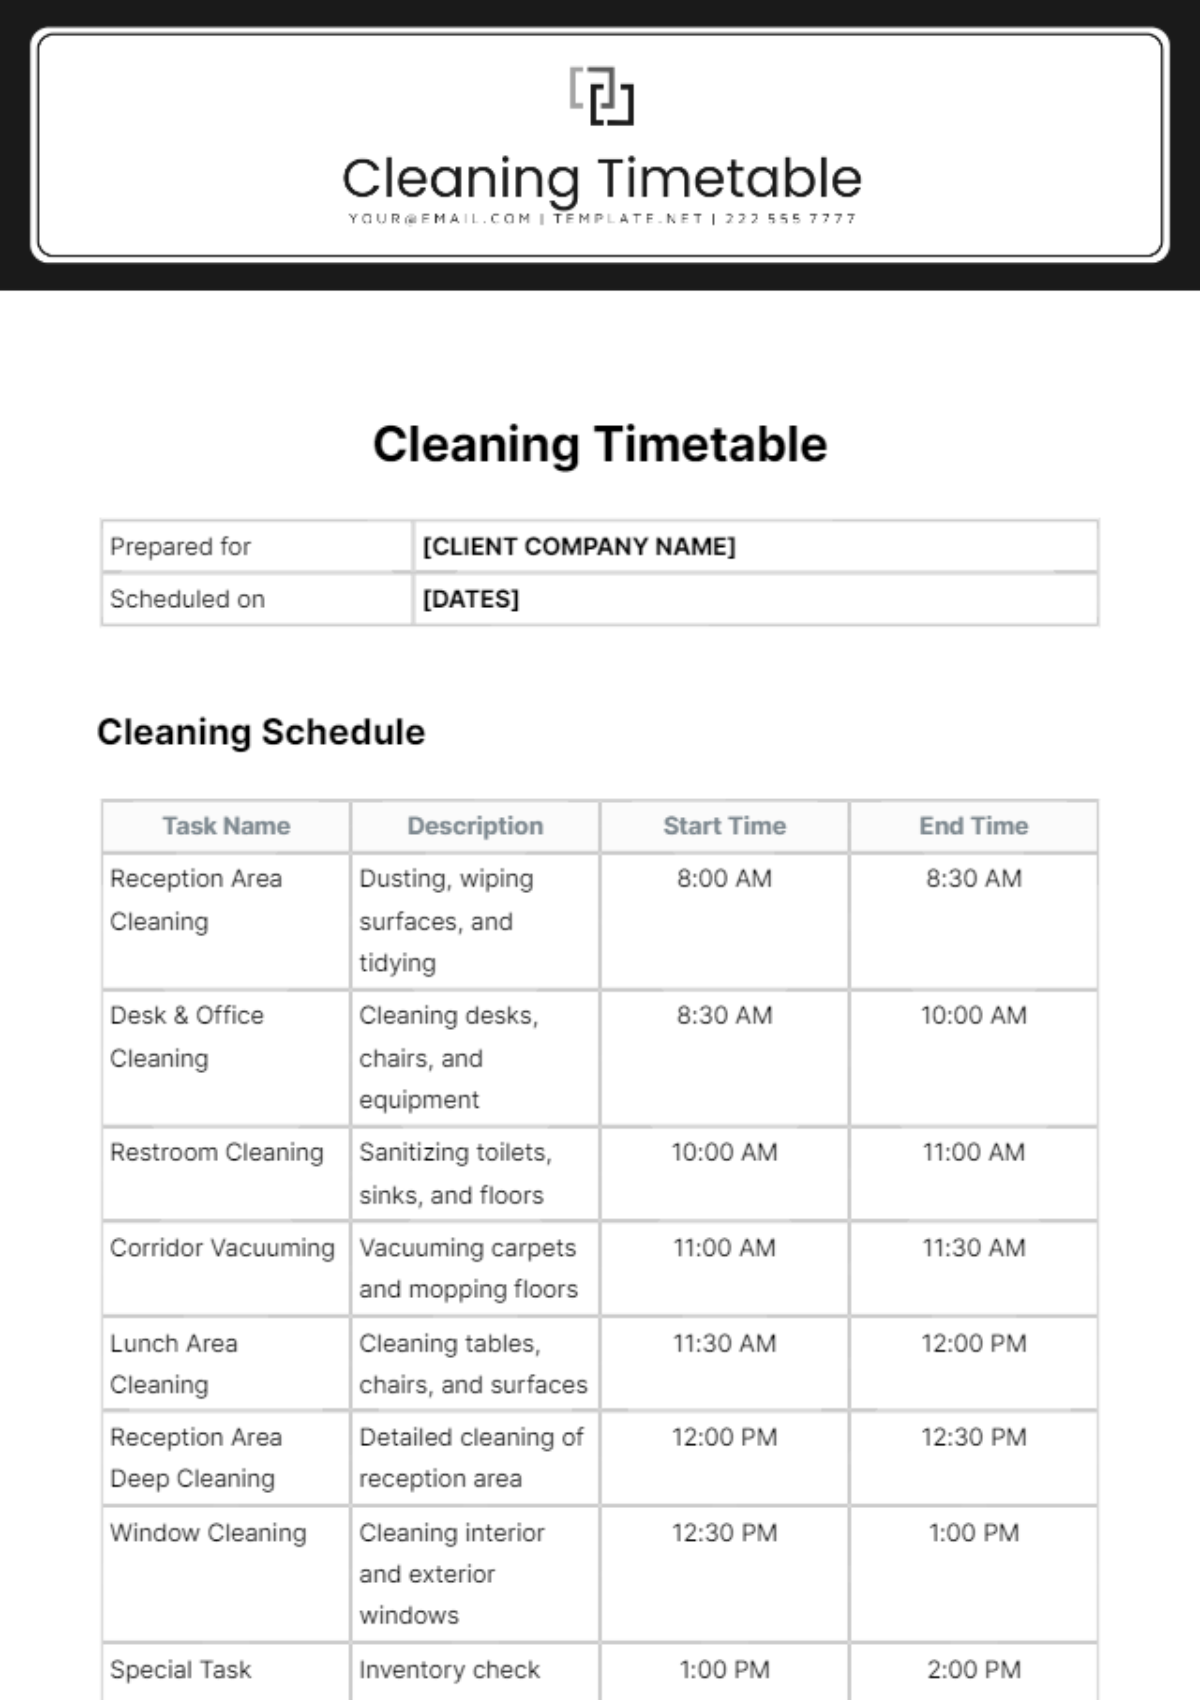 Cleaning Timetable Template